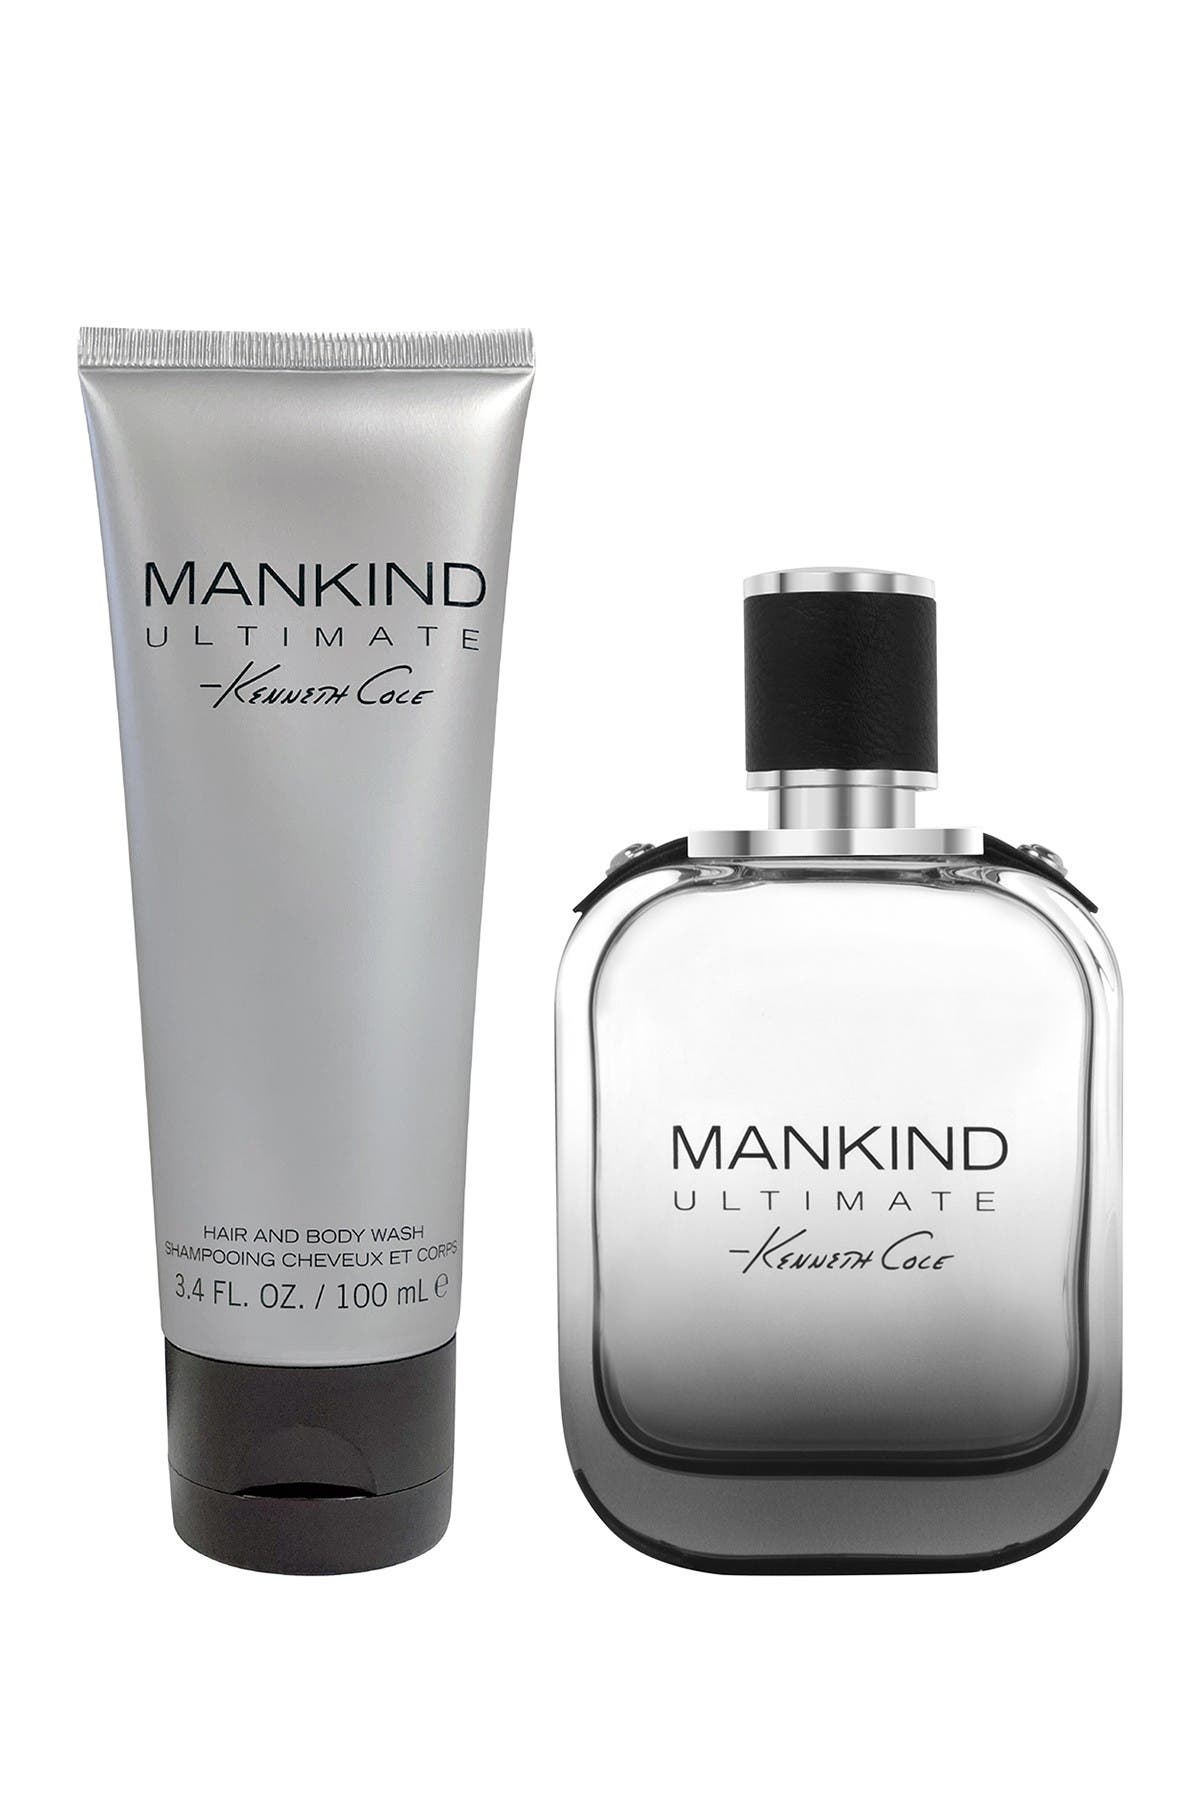 Kenneth Cole Mankind Ultimate 2-piece Gift Set